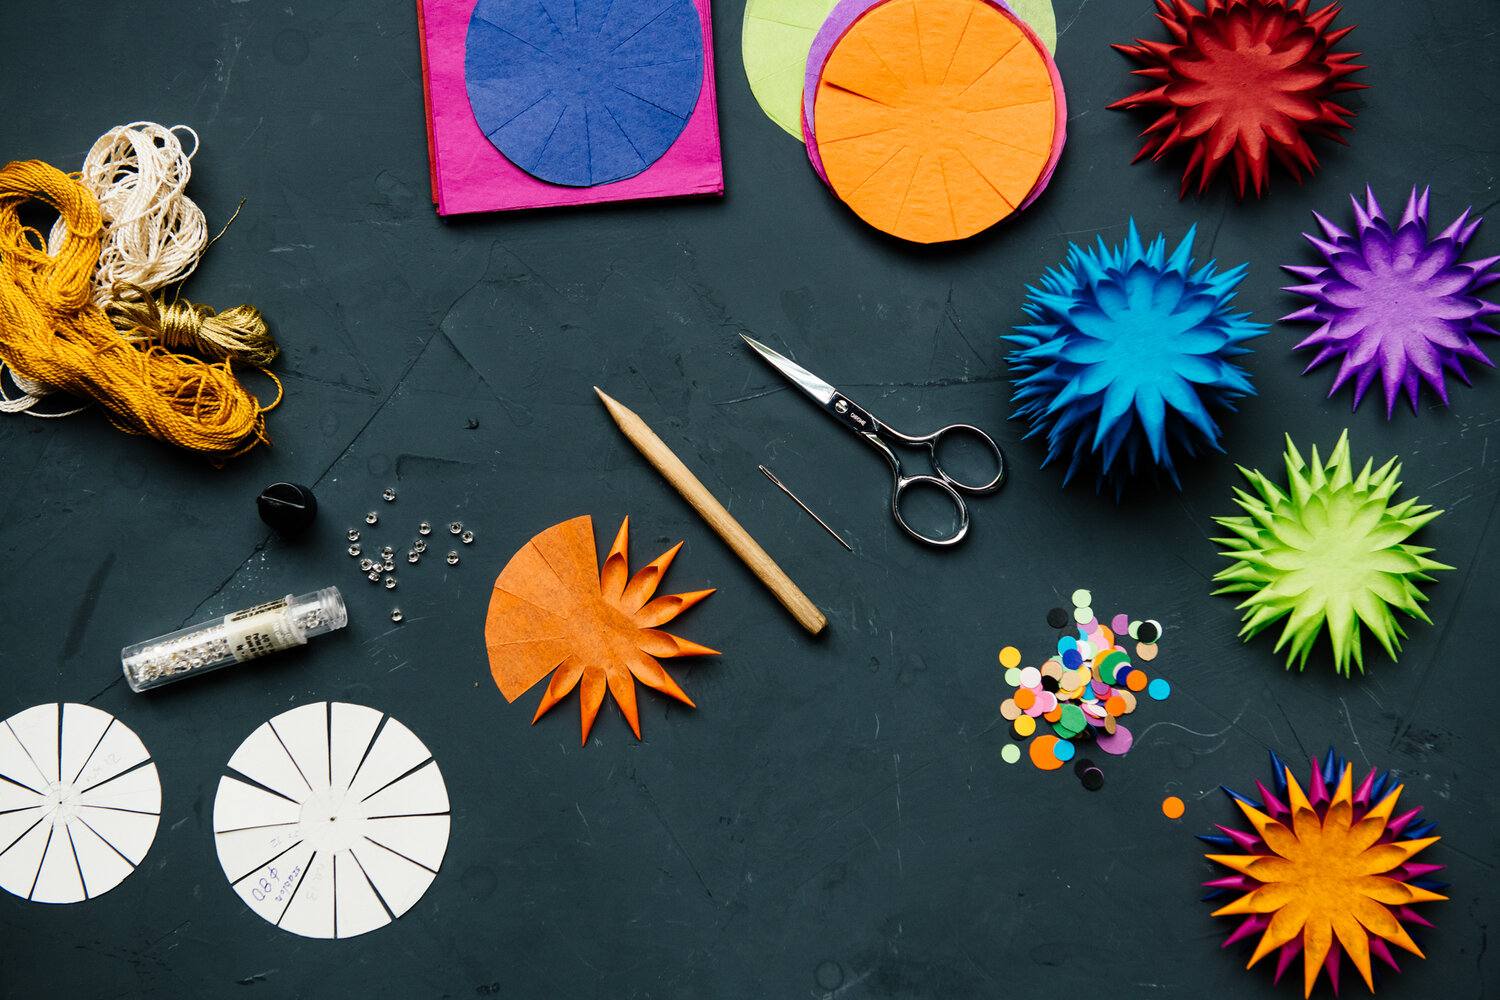 Images of the tools and materials used to create delicate paper ornaments.